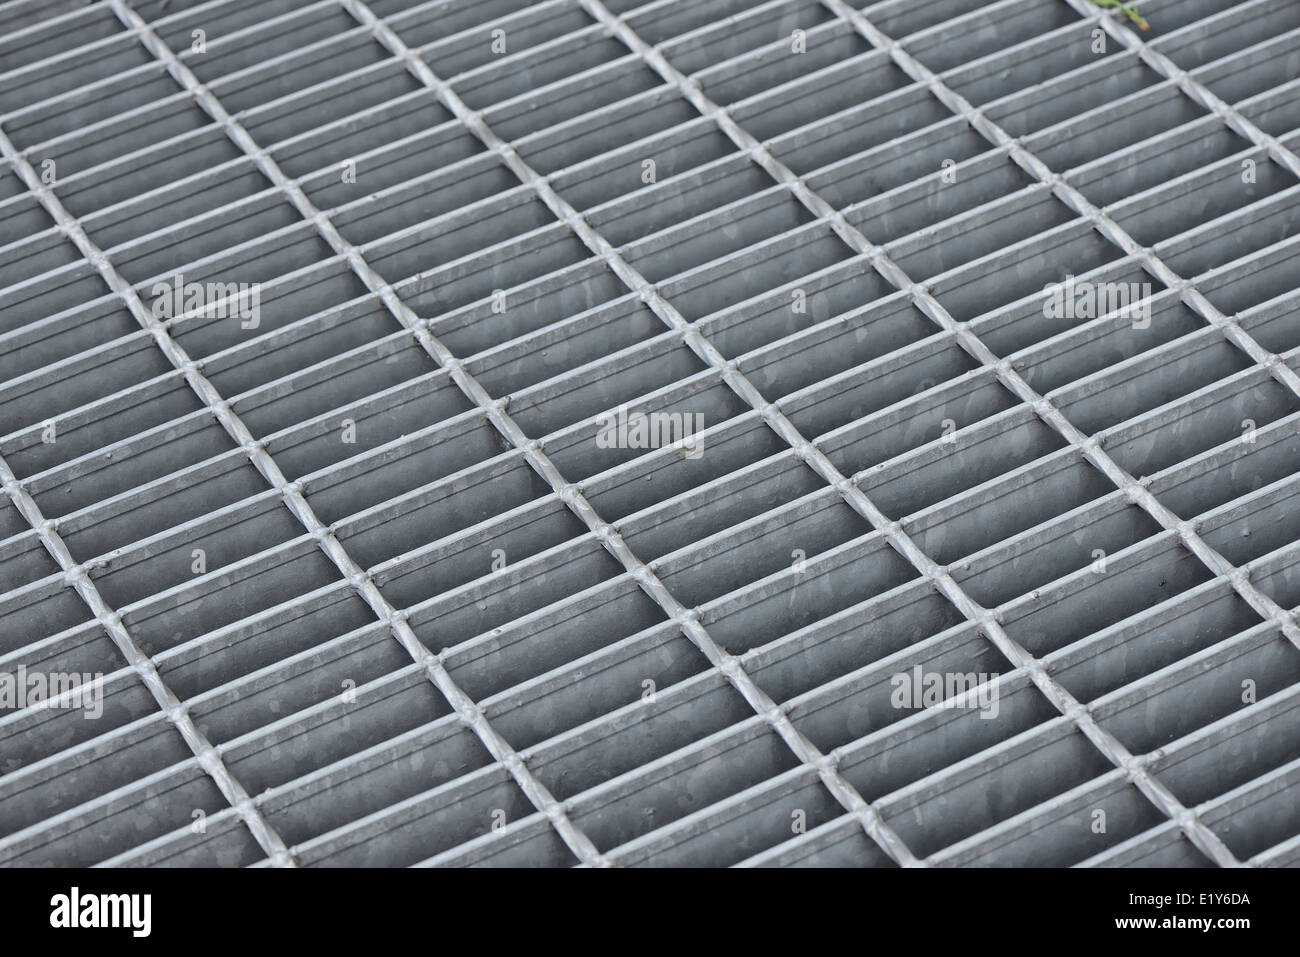 deatil of steel mesh drain cover pattern Stock Photo